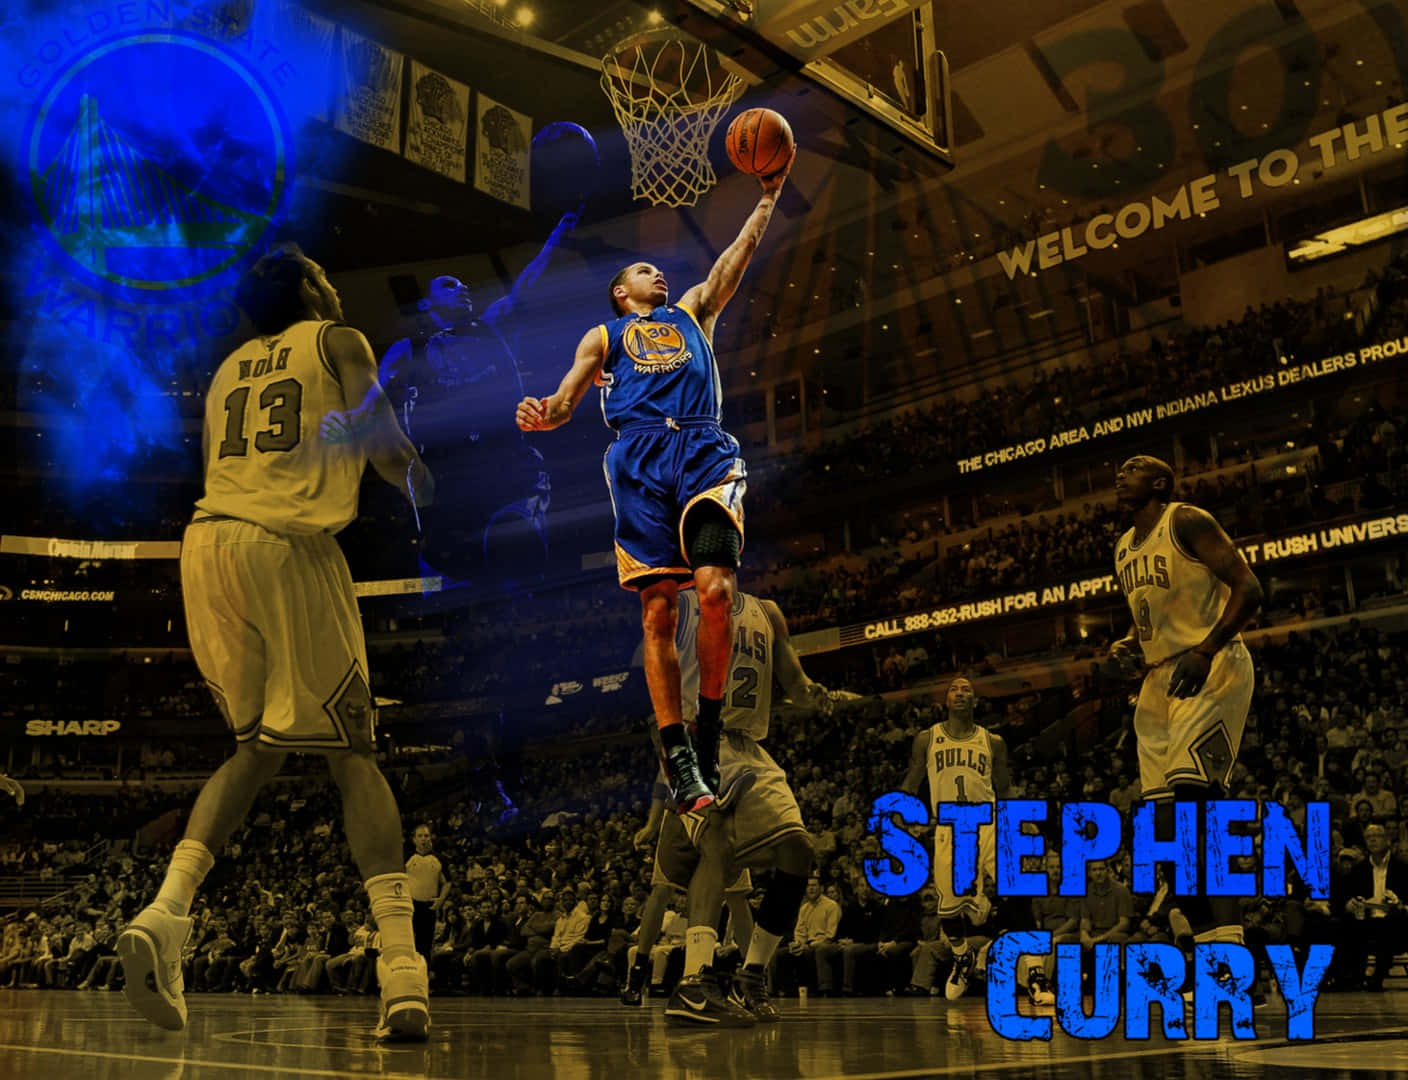 Stephen Curry Shooting a Three-Pointer